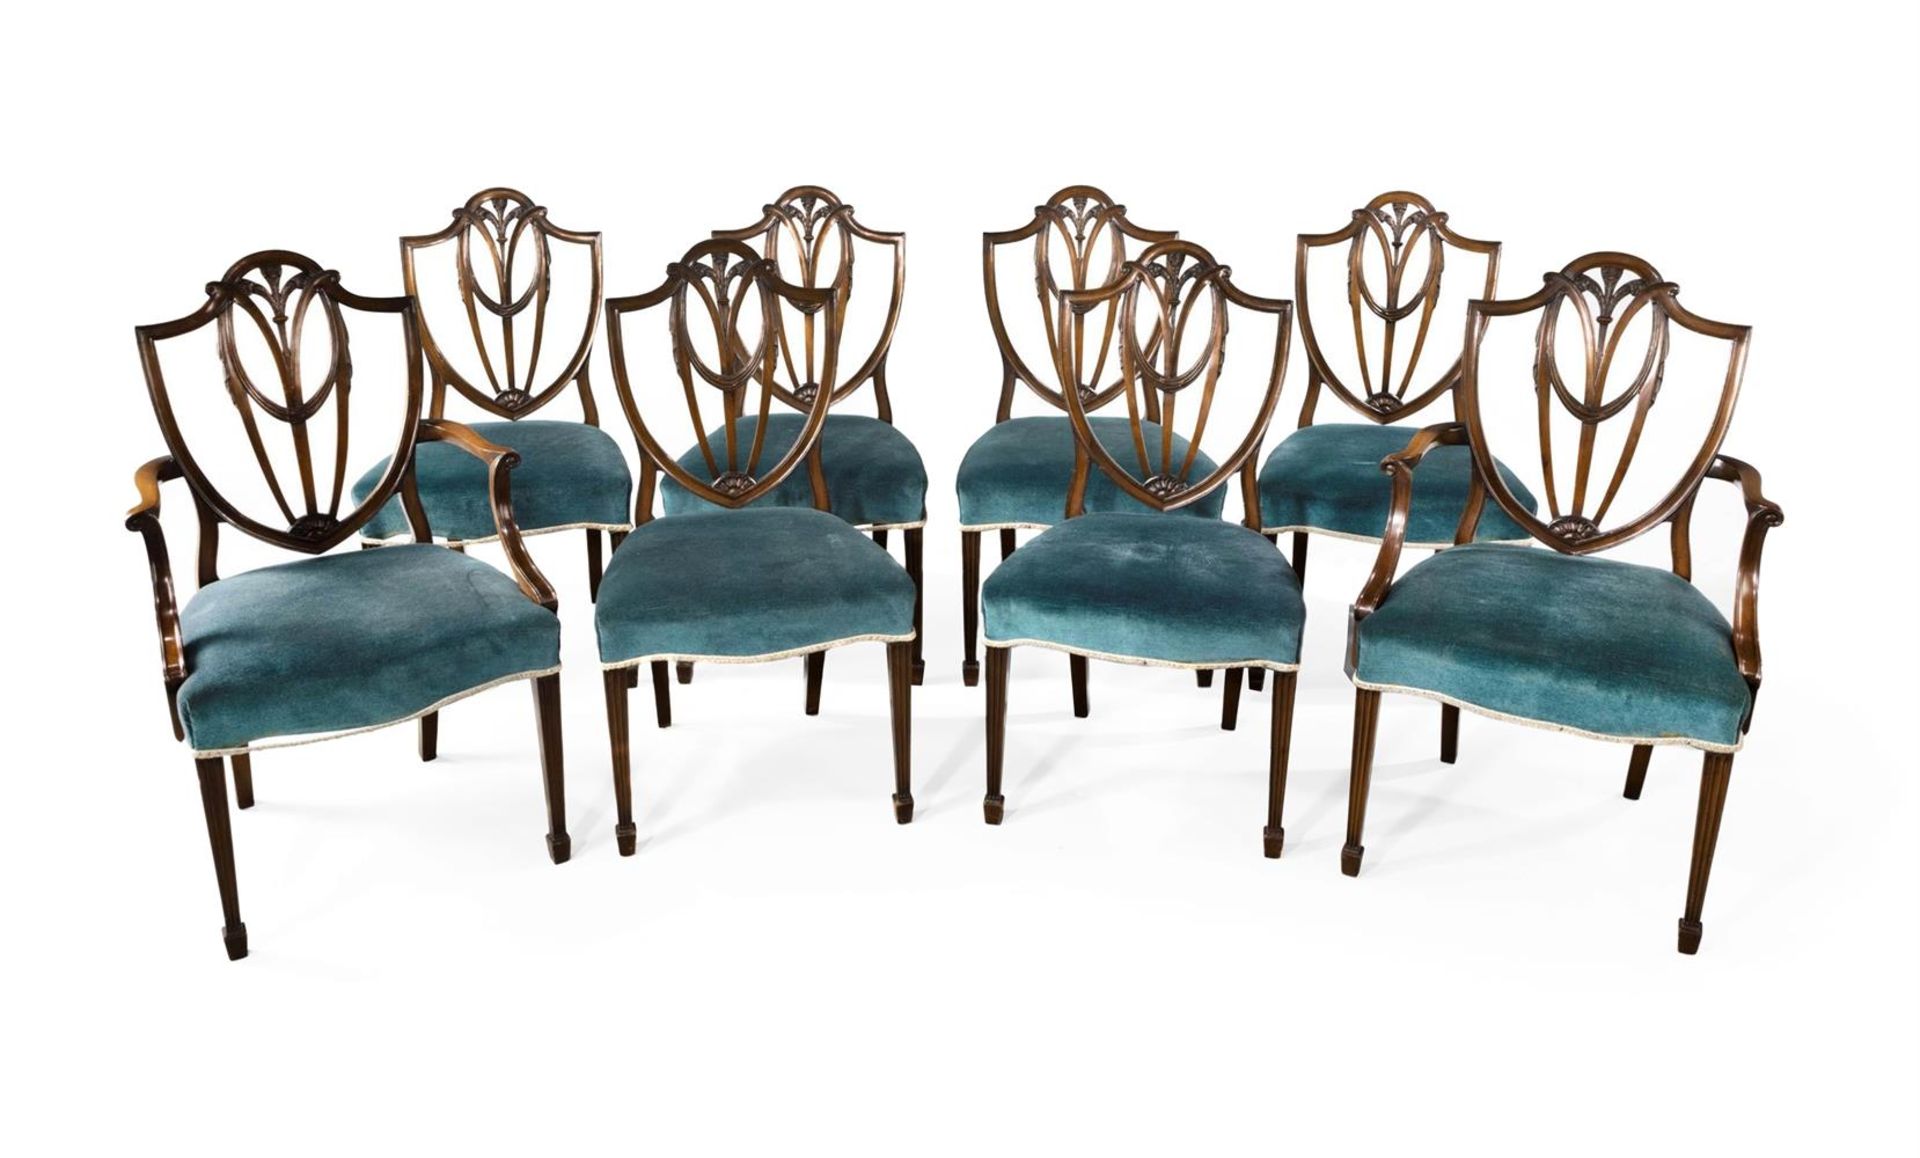 A SET OF EIGHT MAHOGANY DINING CHAIRS IN THE MANNER OF HEPPLEWHITE, 20TH CENTURY